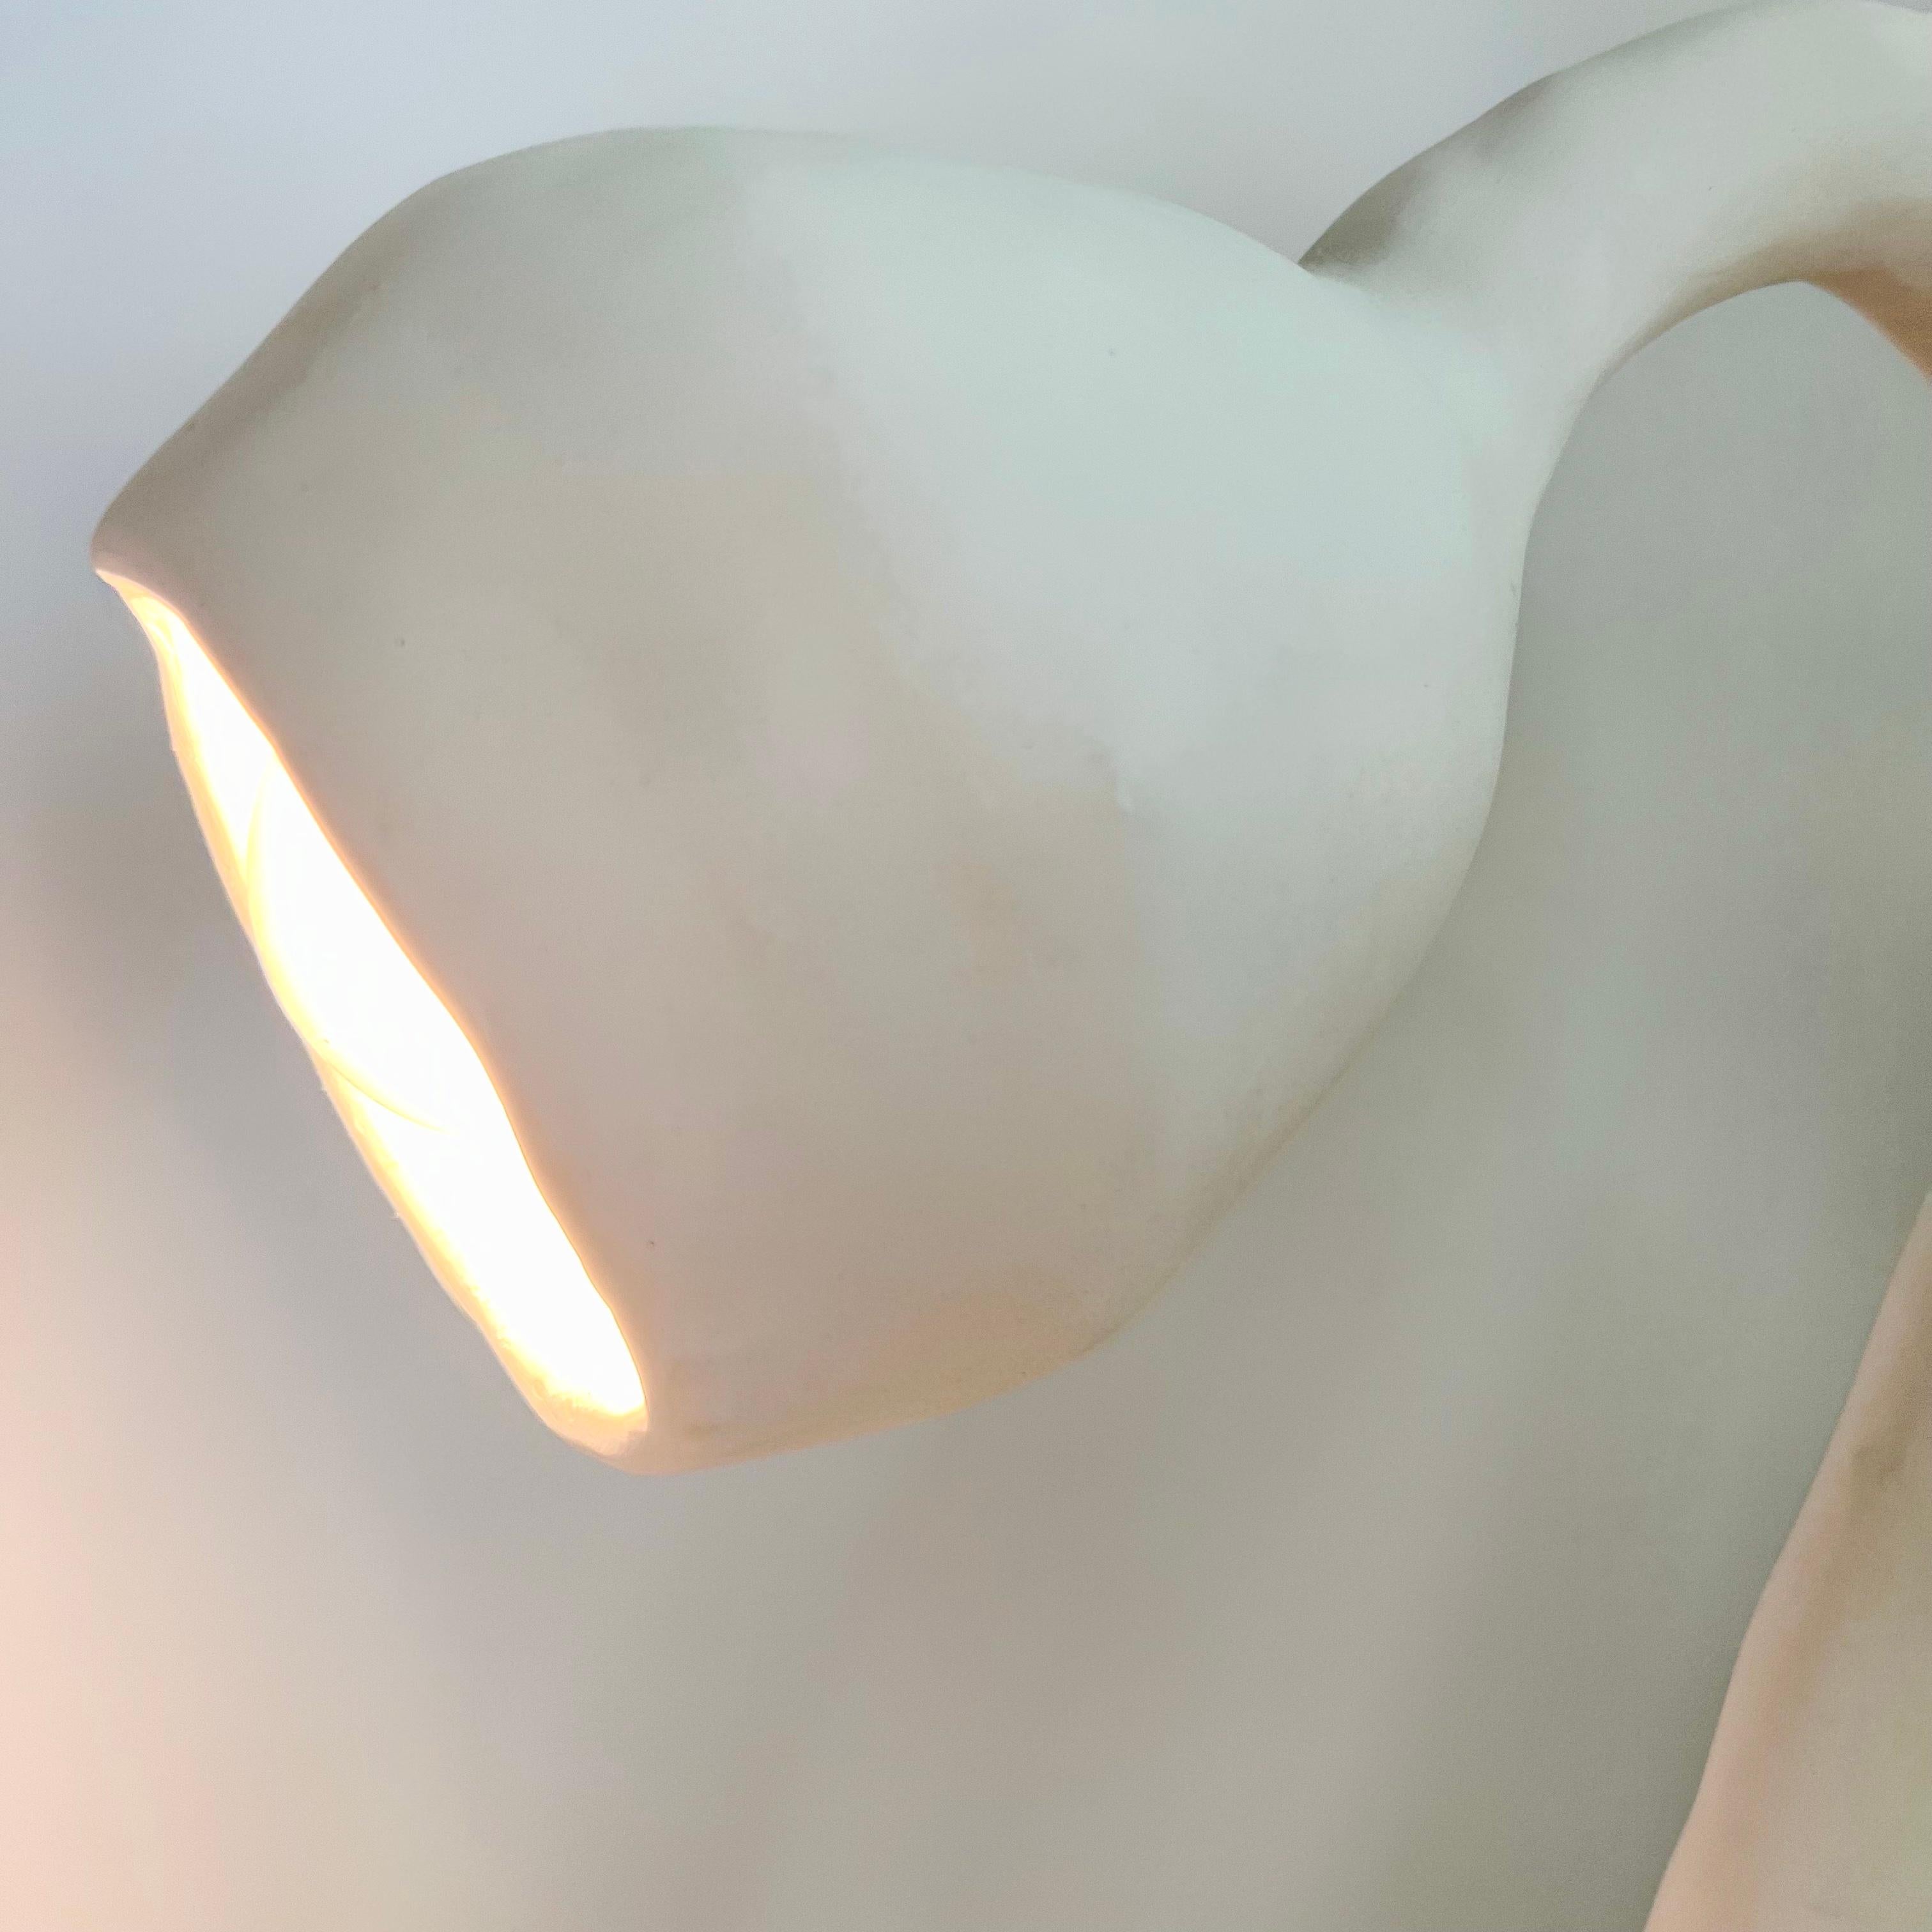 Carved Biomorphic Line by Studio Chora, Table Lamp, White Limestone, Made-To-Order For Sale